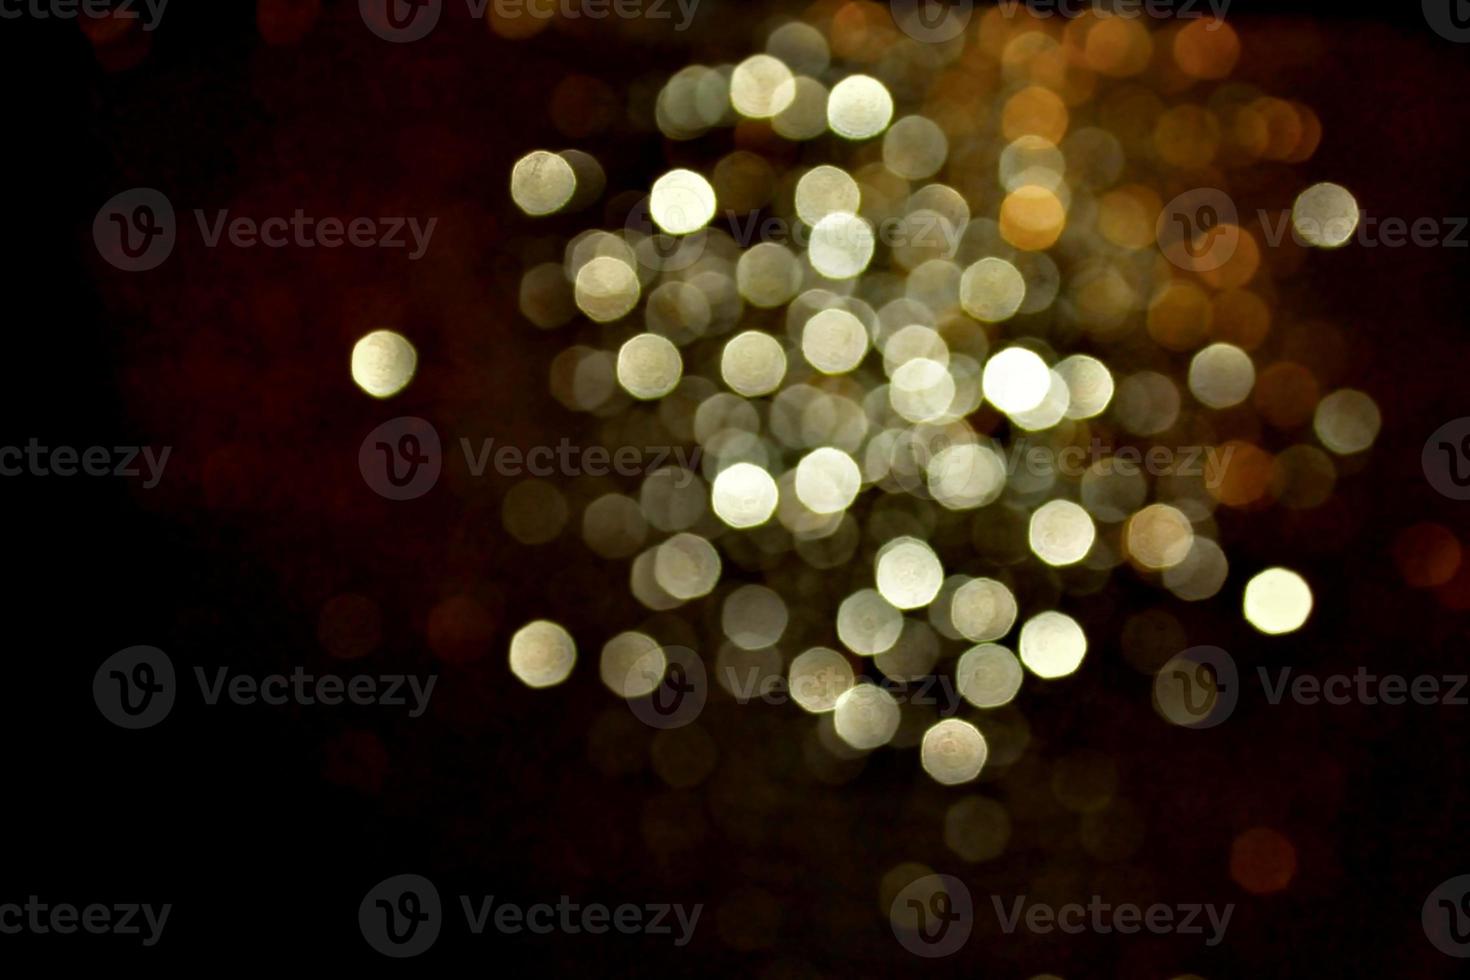 bokeh Colorfull Blurred abstract background for birthday, anniversary, wedding, new year eve or Christmas photo